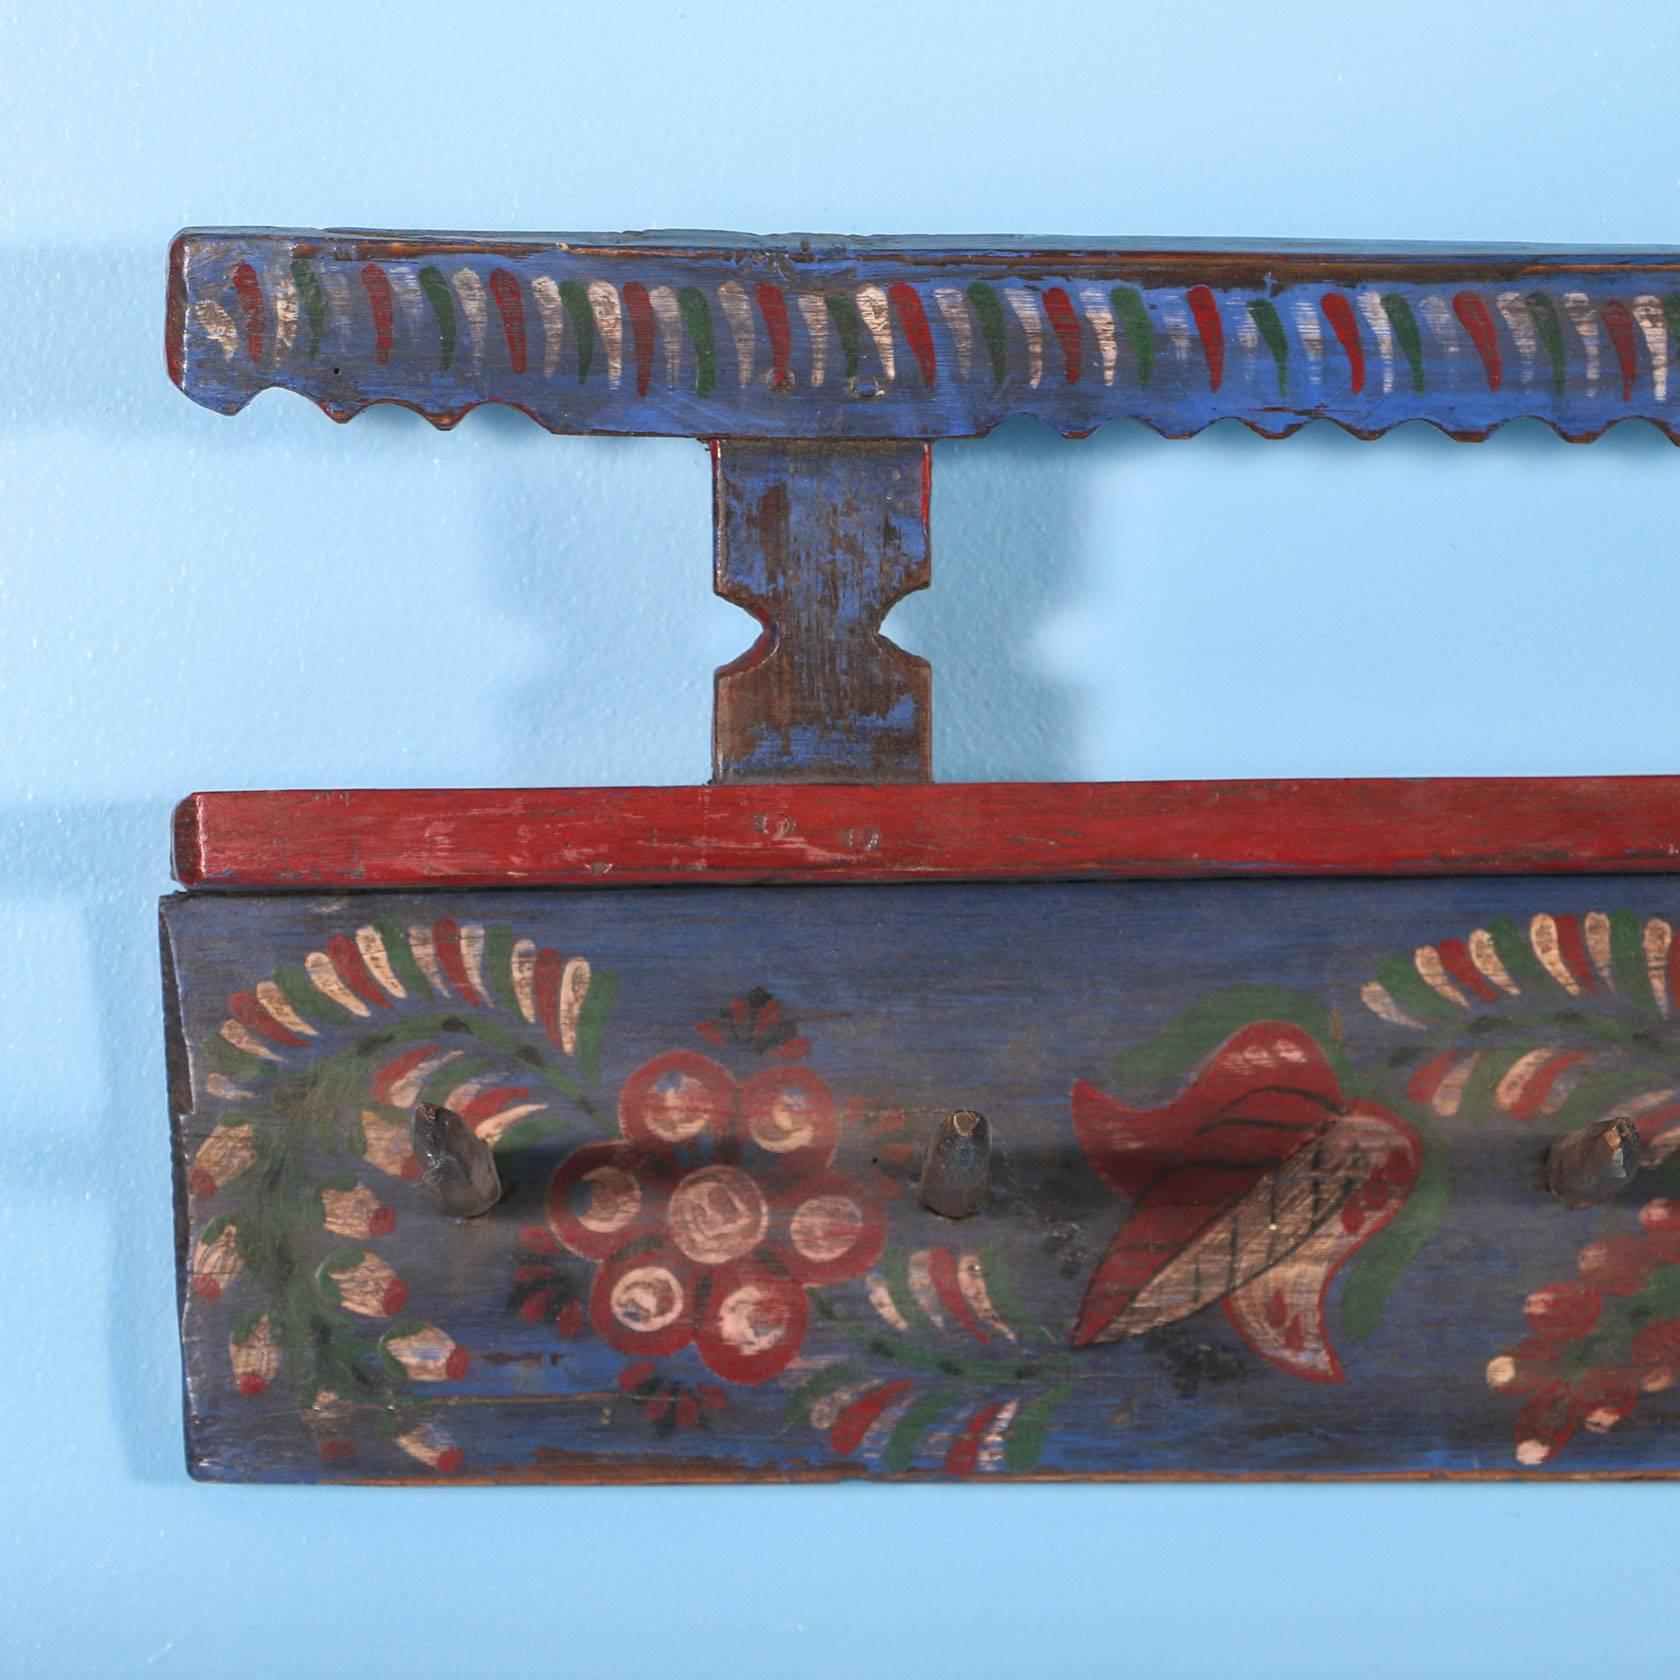 This charming antique hanging wall rack is just over 8' long and still maintains its original blue paint with traditional folk art flowers and vines in red, green and white. The 15 wooden pegs were hand carved and painted blue as well. This rack was